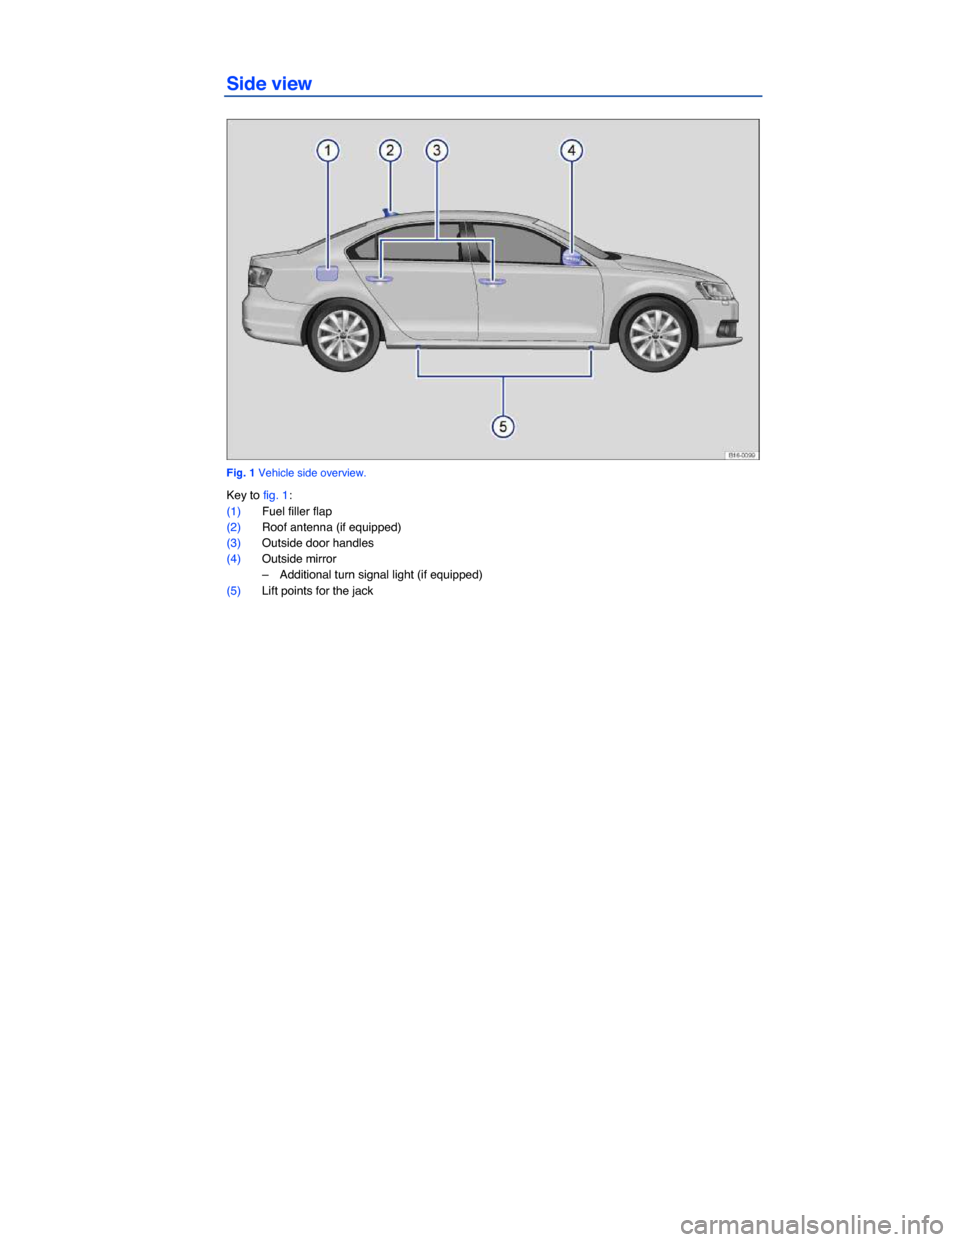 VOLKSWAGEN JETTA 2014 1B / 6.G Owners Manual  
Side view 
 
Fig. 1 Vehicle side overview. 
Key to fig. 1: 
(1) Fuel filler flap  
(2) Roof antenna (if equipped) 
(3) Outside door handles  
(4) Outside mirror  
–  Additional turn signal light (